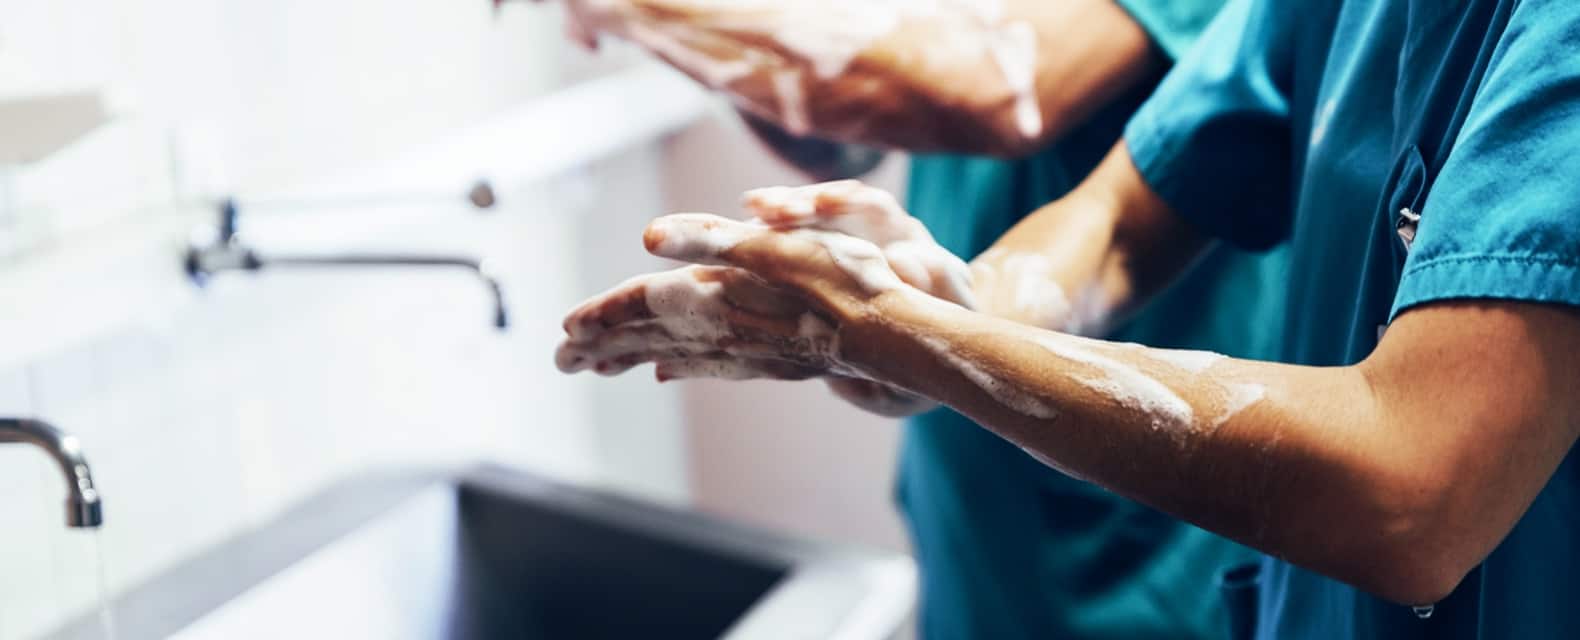 Hand washing in a medical environment